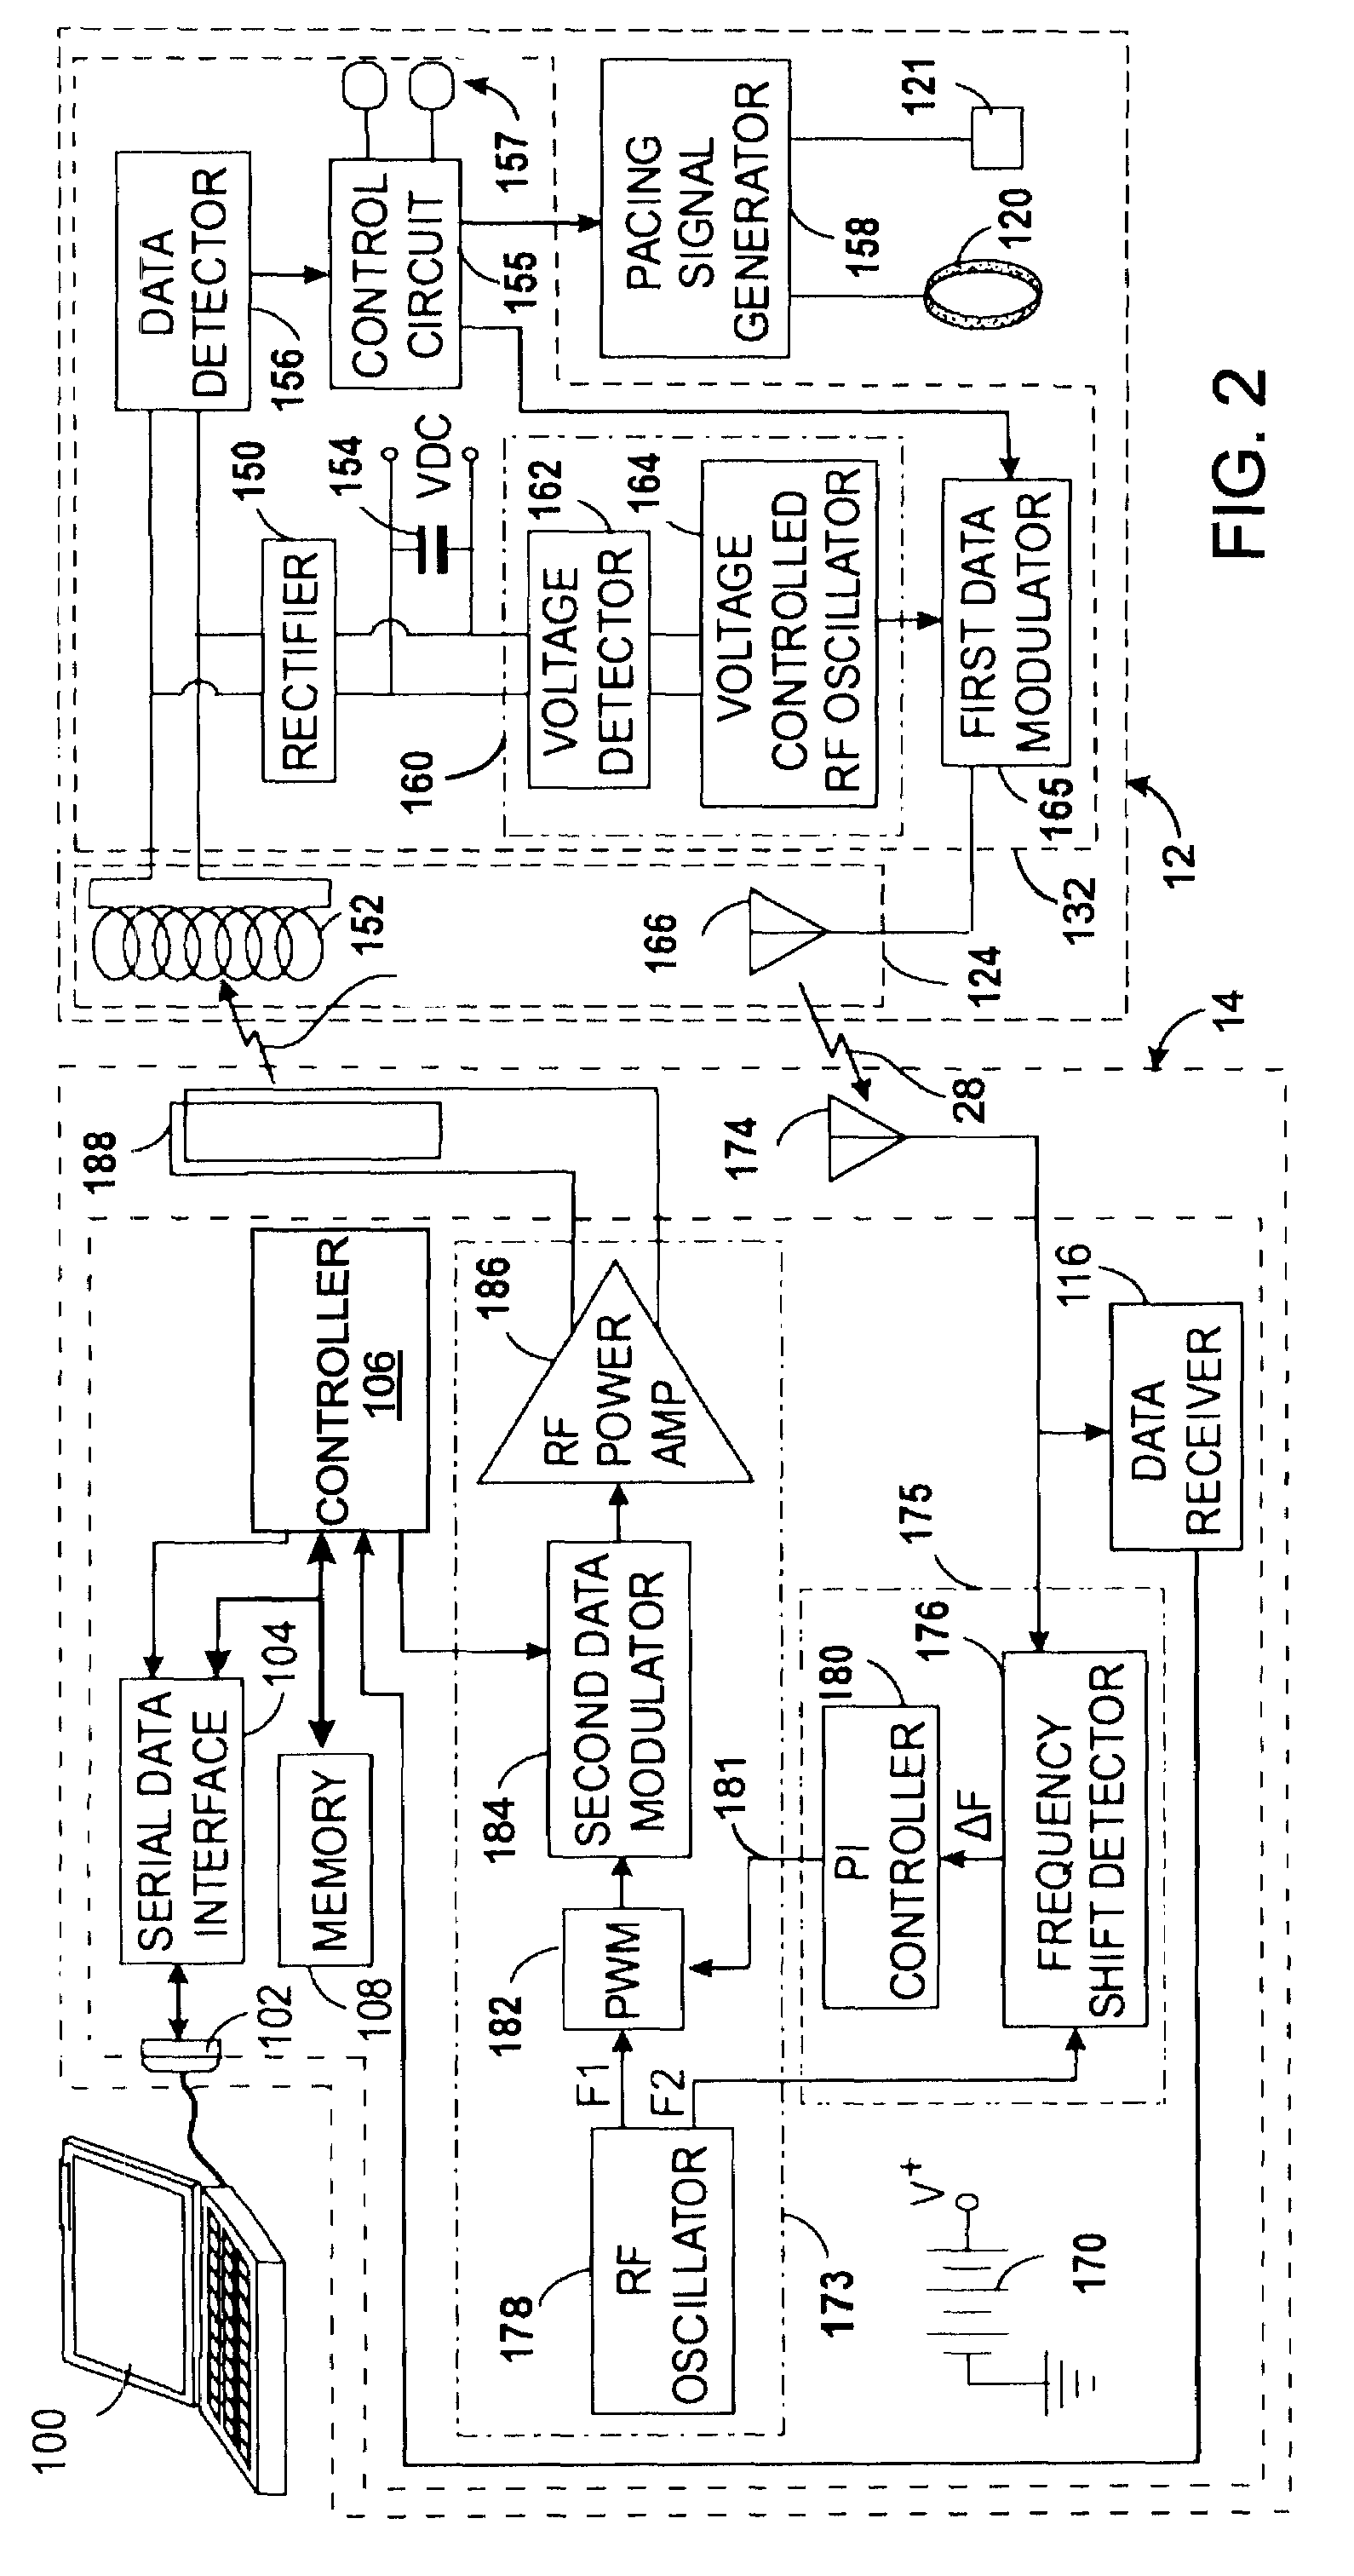 Class-e radio frequency amplifier for use with an implantable medical device